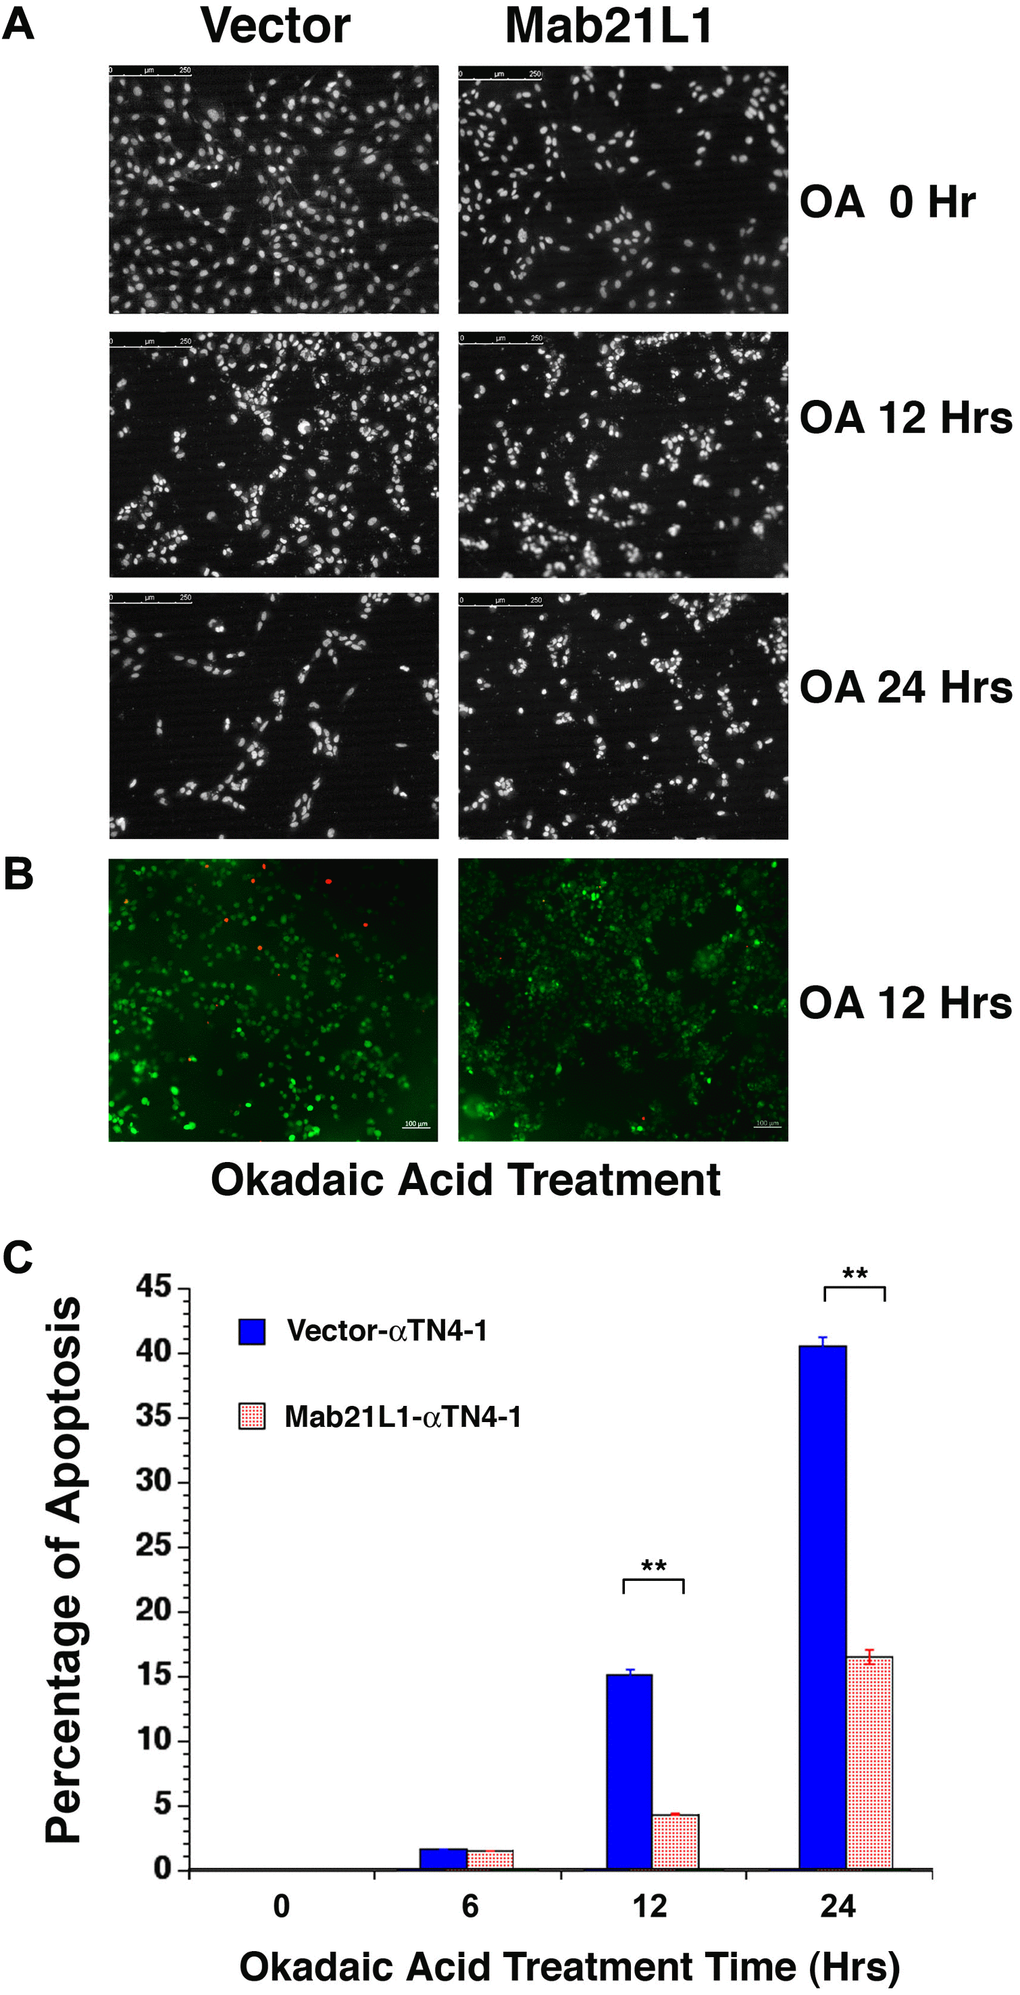 Analysis of okadaic acid (OA)-induced apoptosis of vector-αTN4-1 (vector) and MAB21L1-αTN4-1 (Mab21L1) cells. (A) Hoechst staining of OA-treated vector-αTN4-1 and MAB21L1-αTN4-1 cells for 0 to 24 hours. The apoptotic cells displayed fragmented or condensed nuclei, or were detached from the culture dishes, so that empty space appeared. Both vector-αTN4-1 and MAB21L1-αTN4-1 cells were grown to the density as shown in row one of Figure 2A (approximately 90% confluence, 0 Hr treatment), then subjected to 100 nM okadaic acid (OA) treatment with for 12 and 24 hrs. After OA treatment, the cells were processed for Hoechst staining as described (Mao et al., 2001). (B) Image of live cells (green color) and apoptotic cells (read color) of the vector-αTN4-1 and MAB21L1-αTN4-1 cells after 12 Hrs treatment by OA. (C) Quantitative results of apoptosis rate using live/dead assay as described (Wang et al., 2021). OA treatment for 12 hrs and 24 hrs induced about 15% and 41% apoptosis in vector-transfected cells, respectively. In contrast, only about 5% and 16% apoptosis were detected in MAB21L1-transfected cells after 12h and 24h-treatment with 100 nM OA. Note that MAB21L1 displayed the anti-apoptotic ability in αTN4-1 cells. Scale bar, 250 μm. N=3. ** p